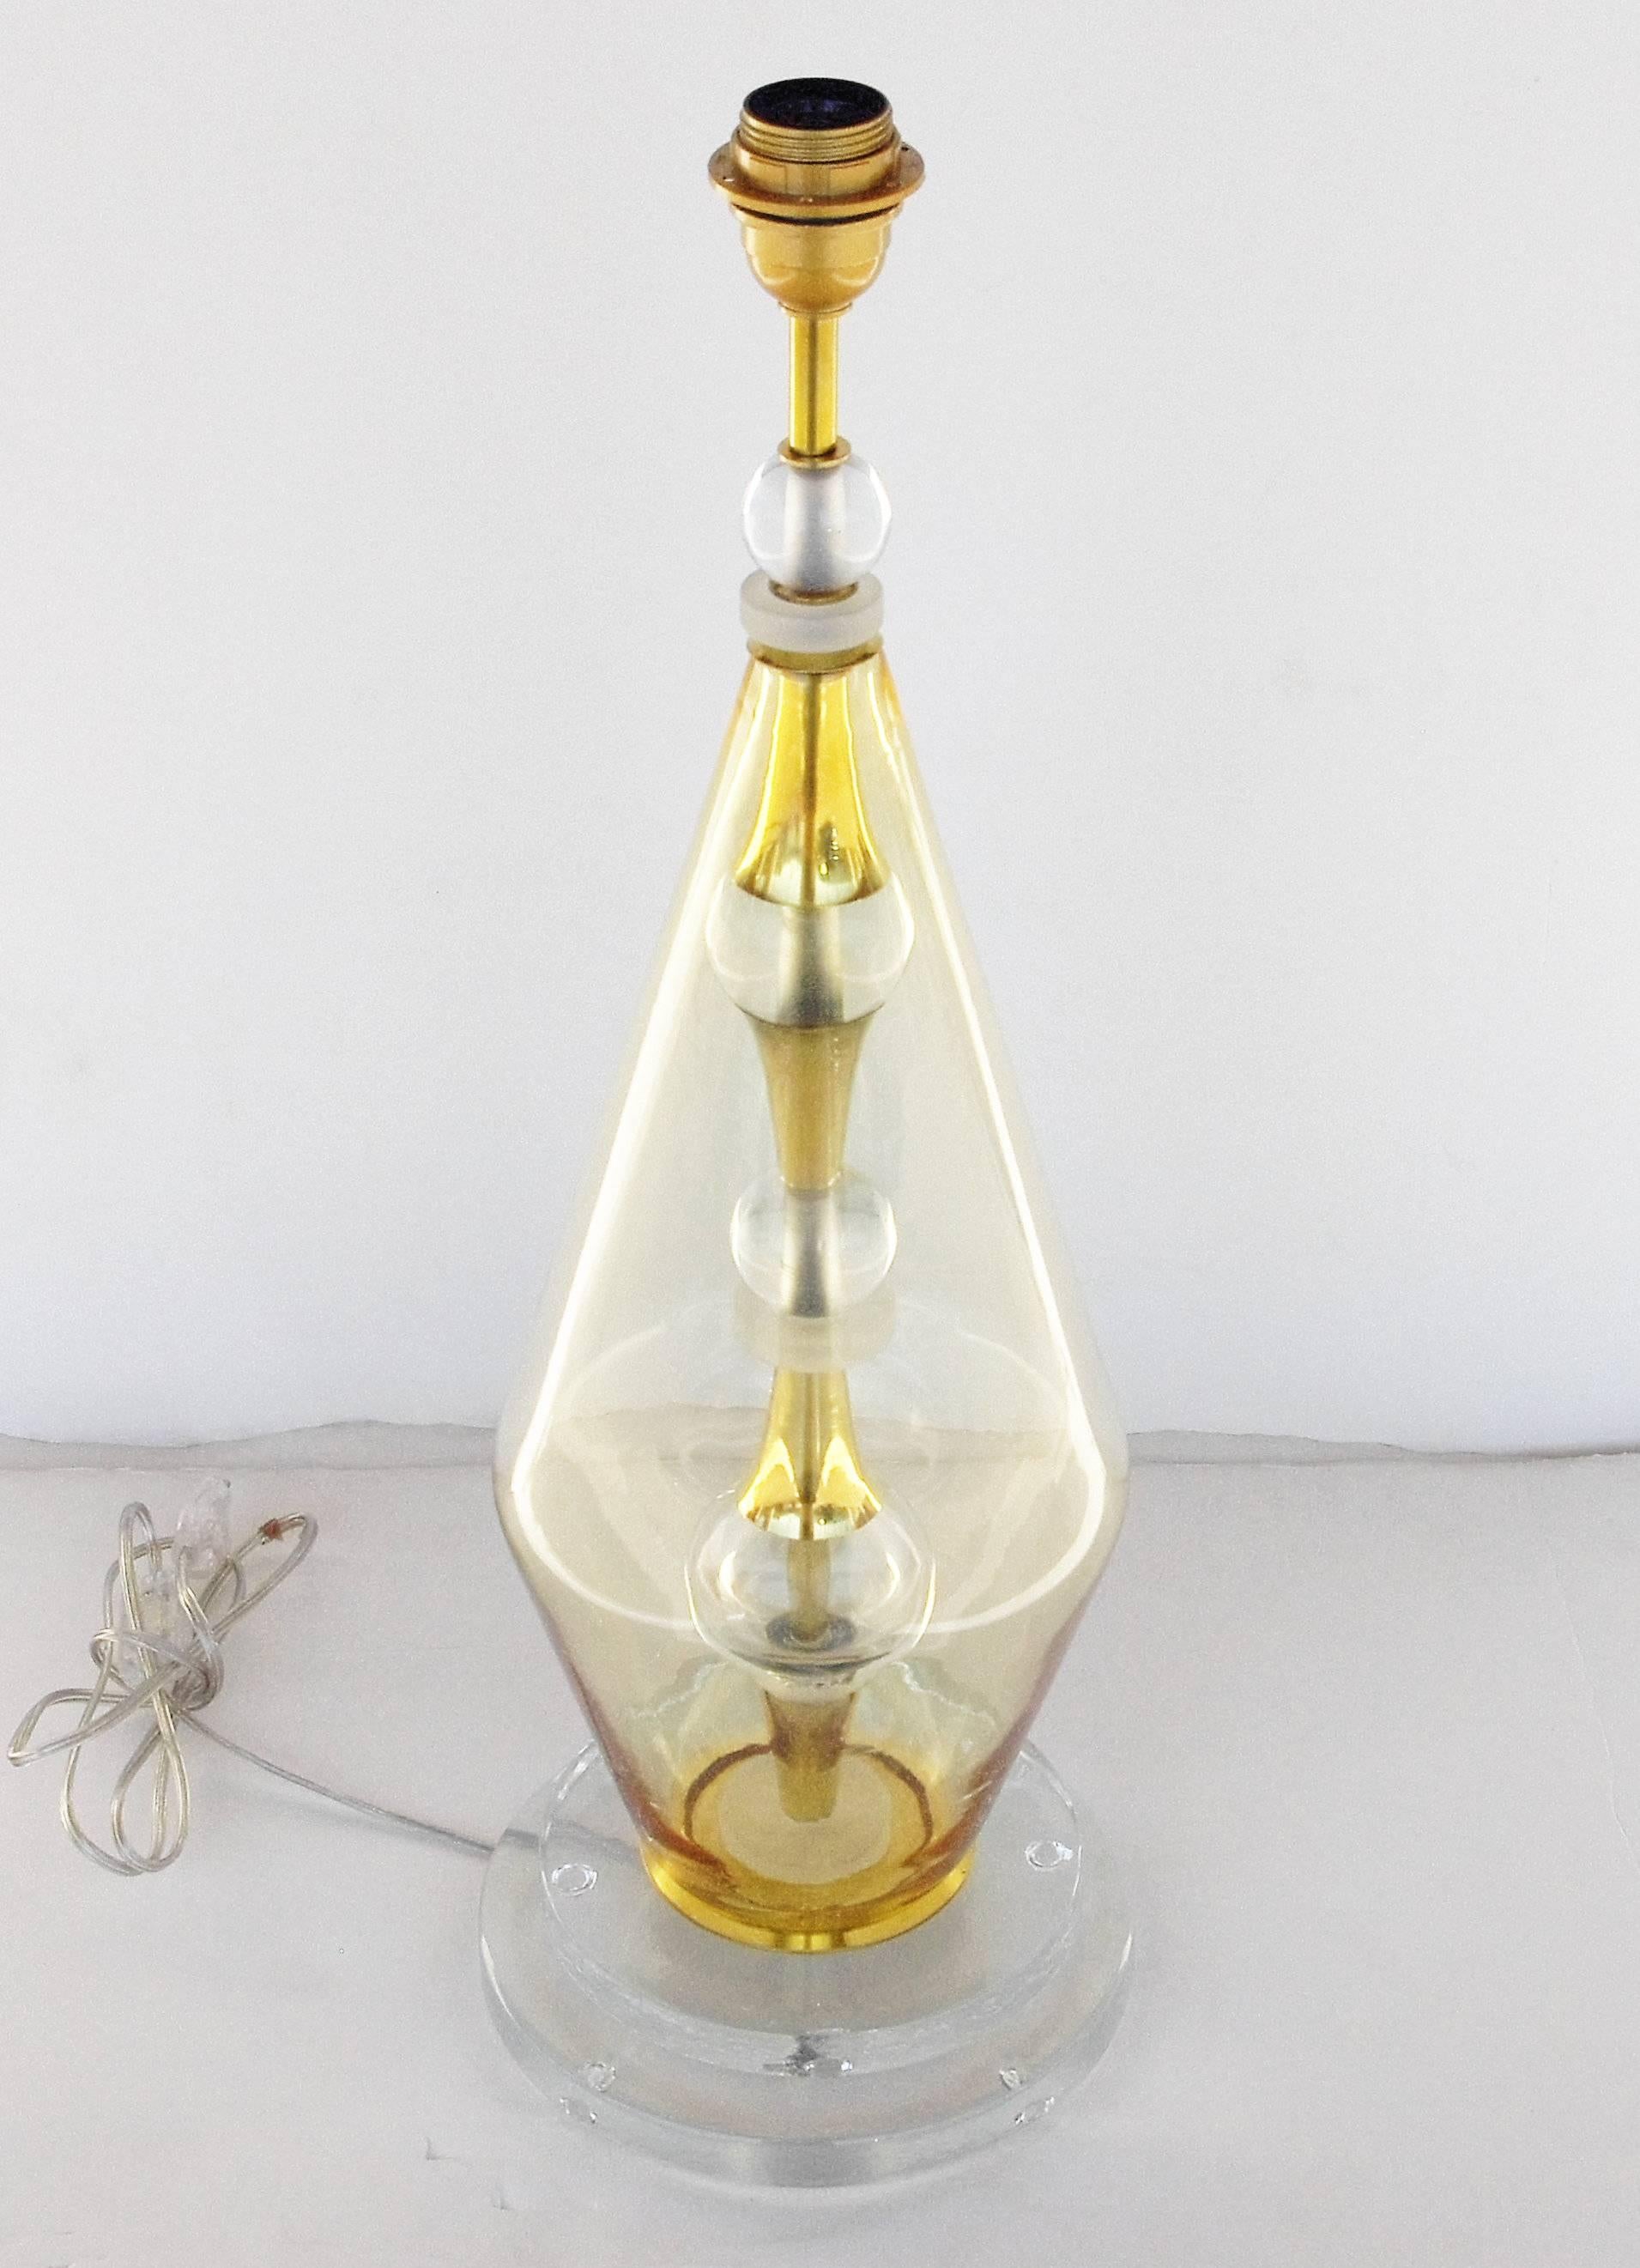 Vintage Italian Murano glass table lamp with gold infused and transparent Murano glasses, mounted on polished brass frame, in the style of Ettore Sottsass, made in Italy, circa 1980s
1 light / E26 or E27 type / max 60W
Measures: Height 25.5